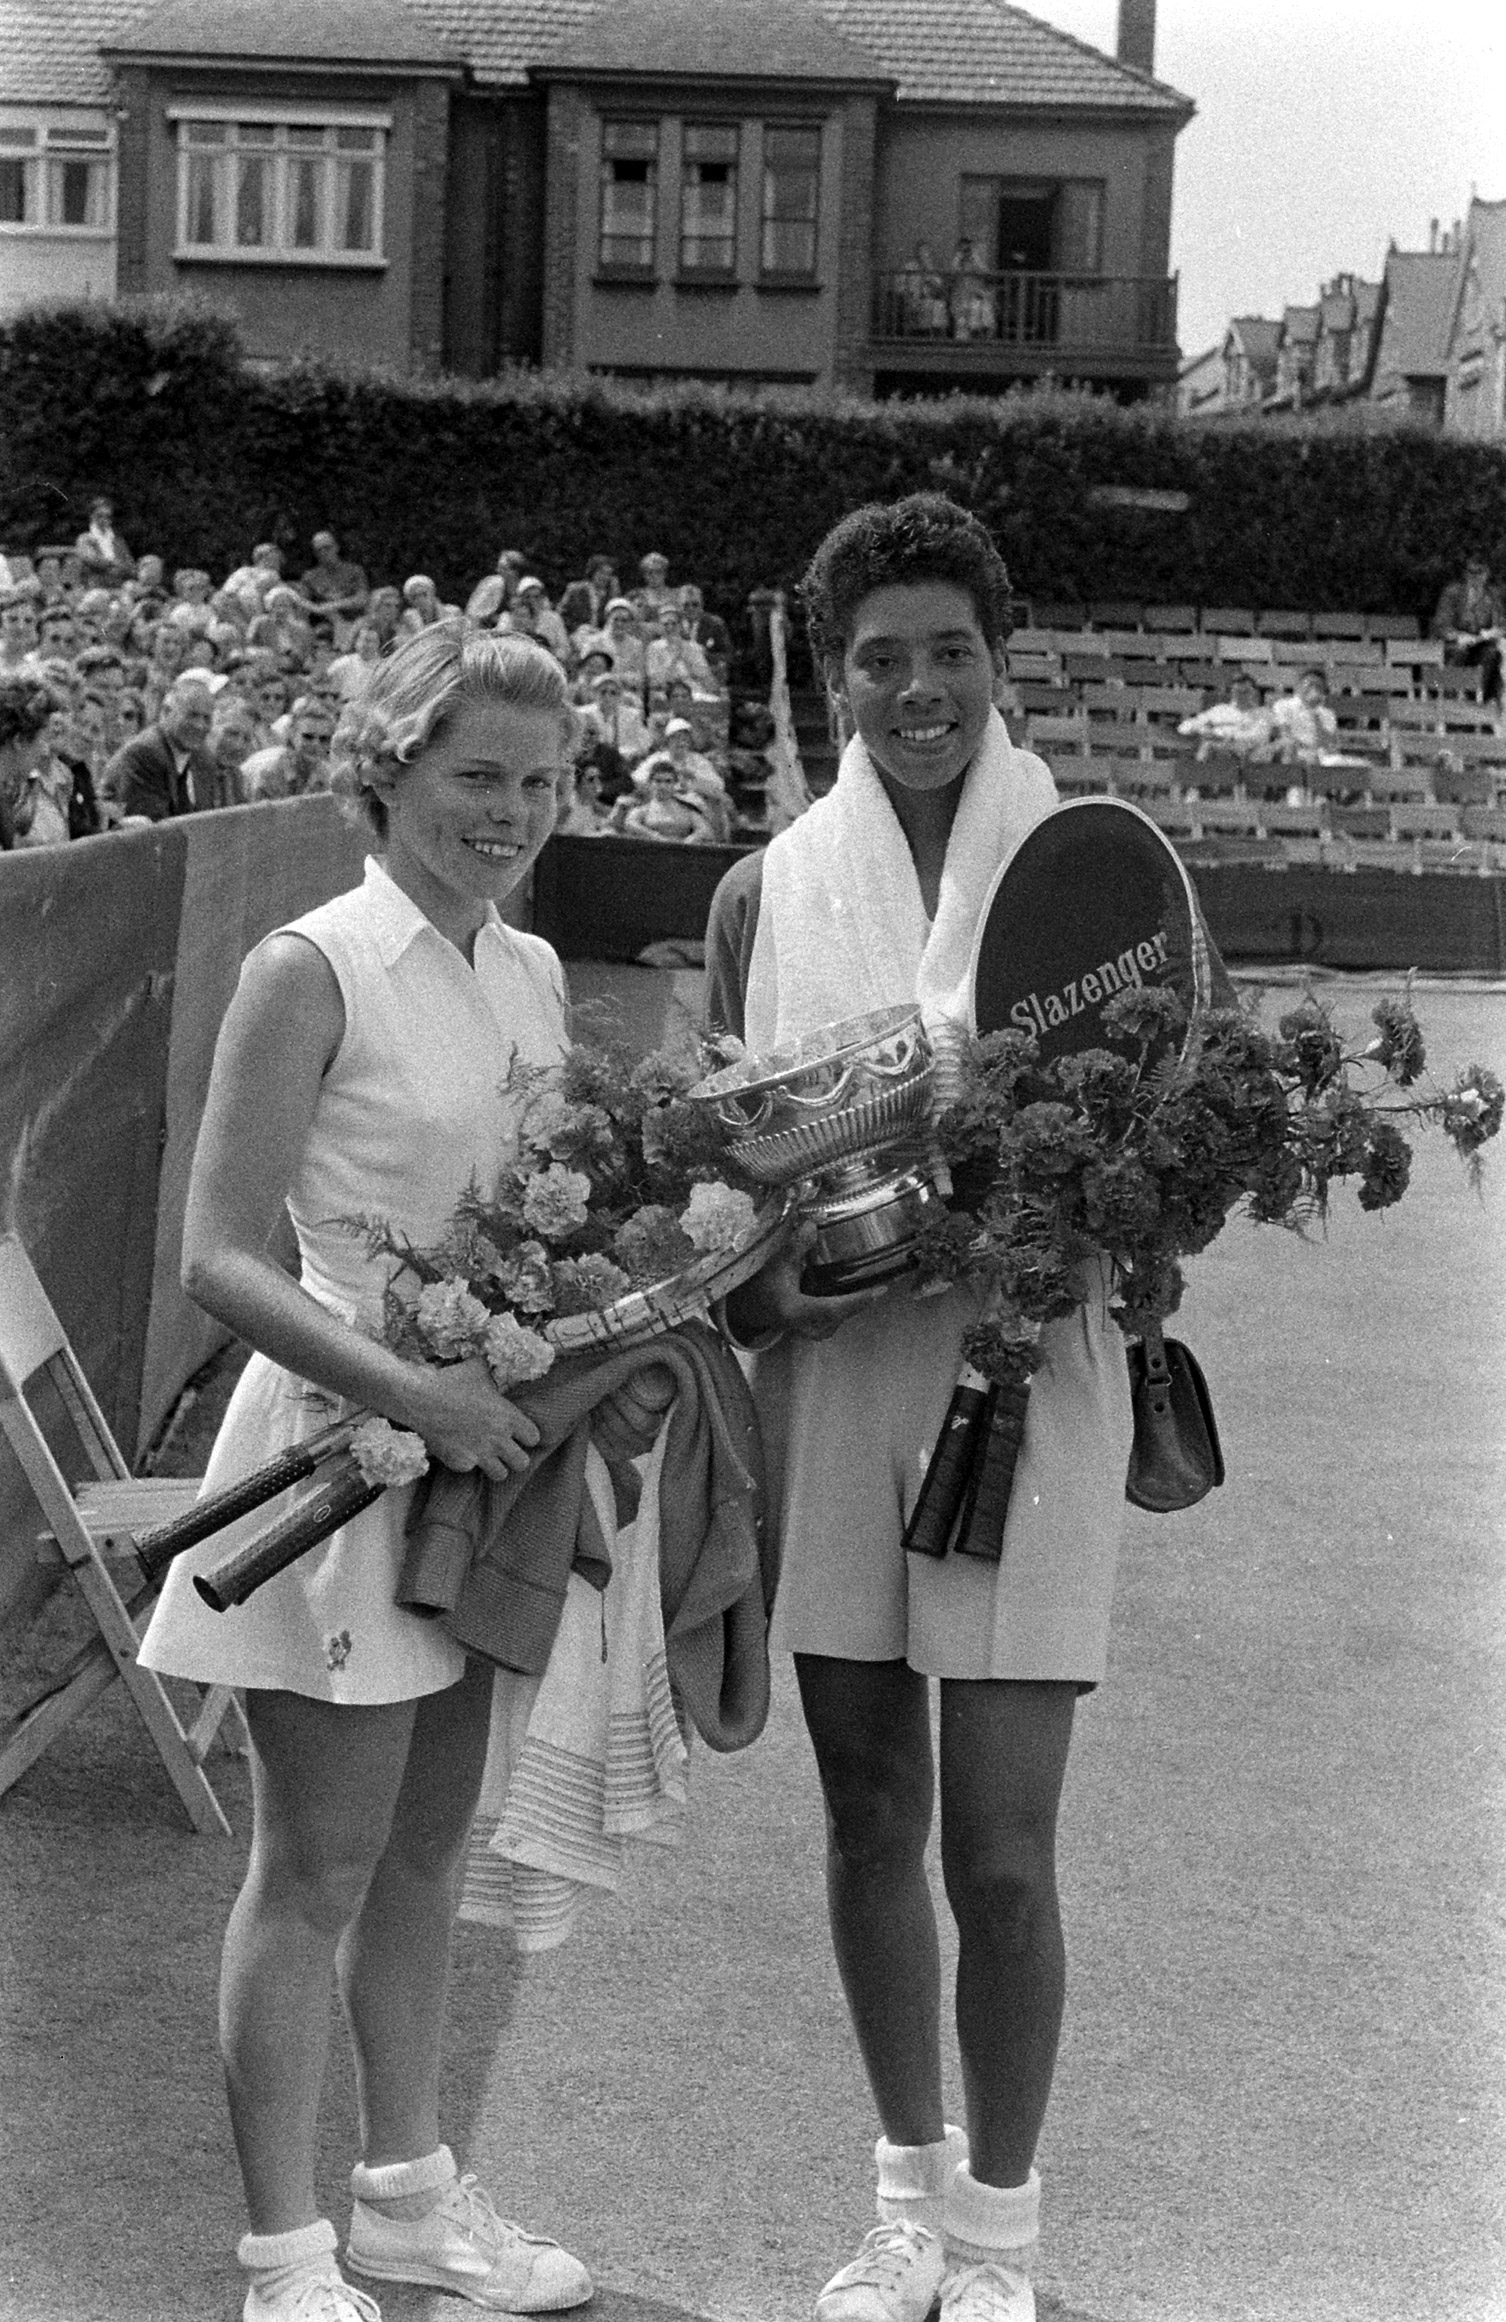 Tennis player Althea Gibson in France, 1956.